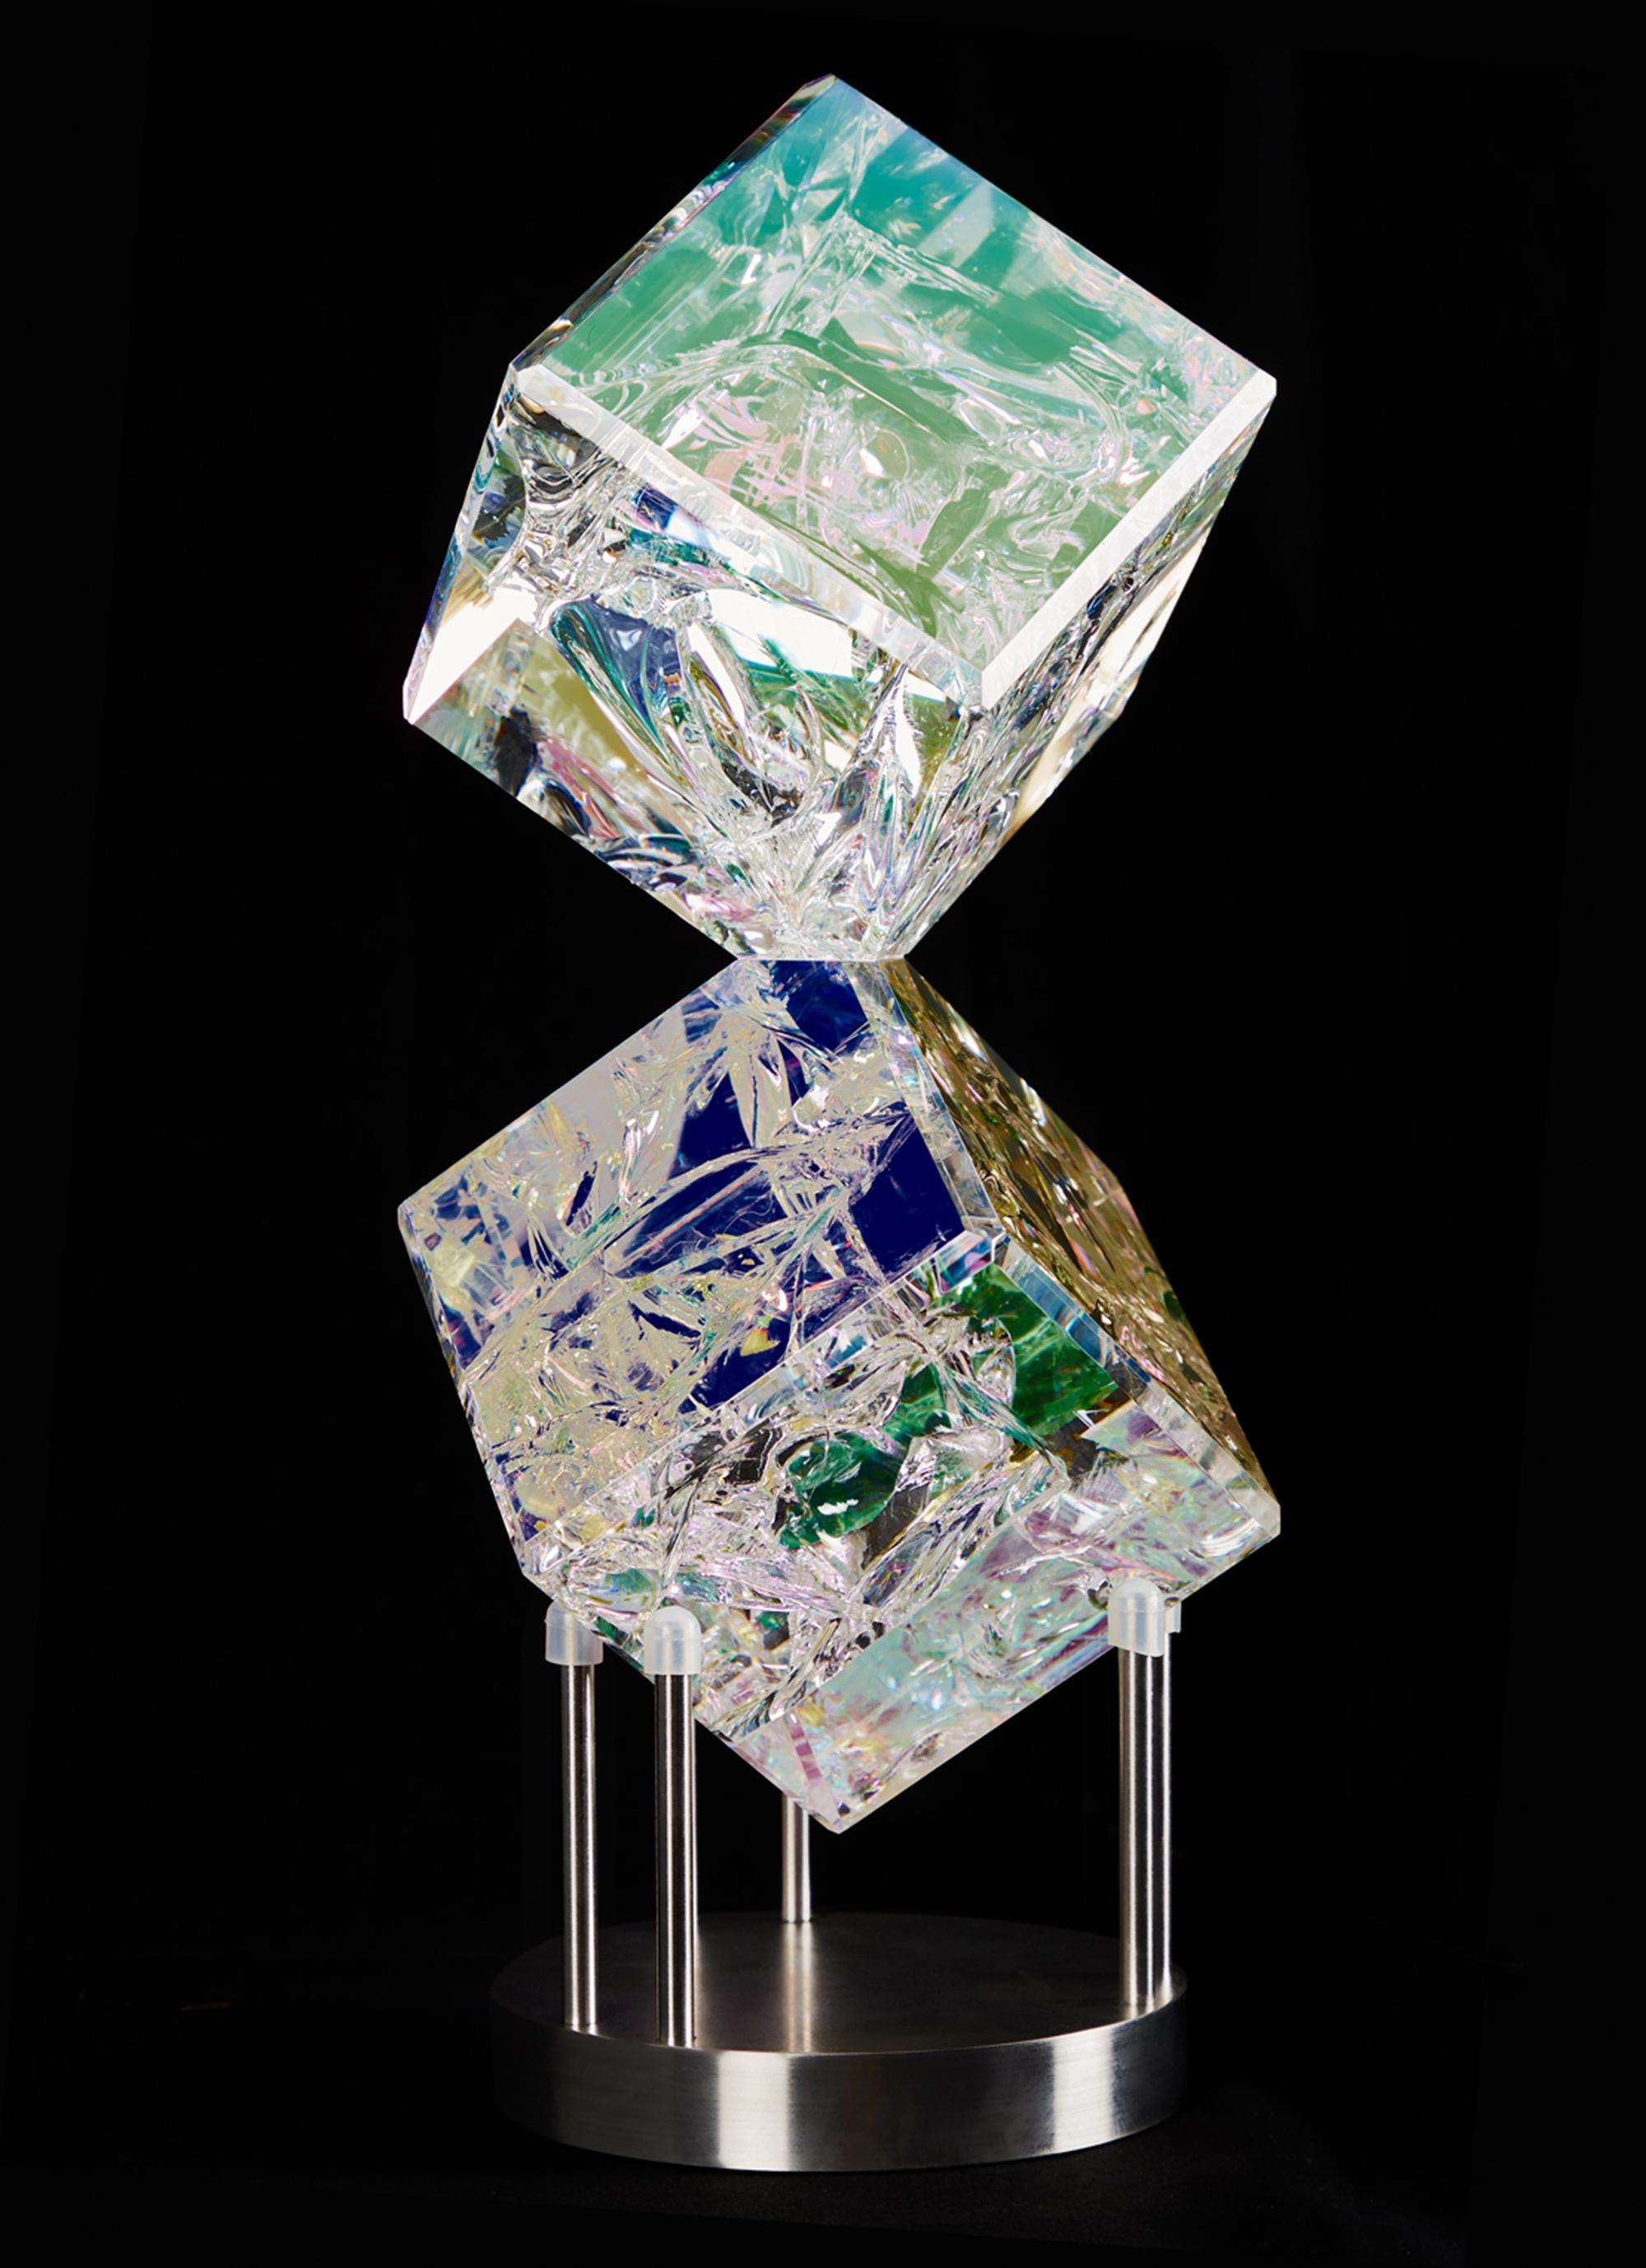 Tom Marosz Abstract Sculpture - '4" Double Cube' Cut, Polished, Float, Glass, Crystal, Optic Dichroic Sculpture